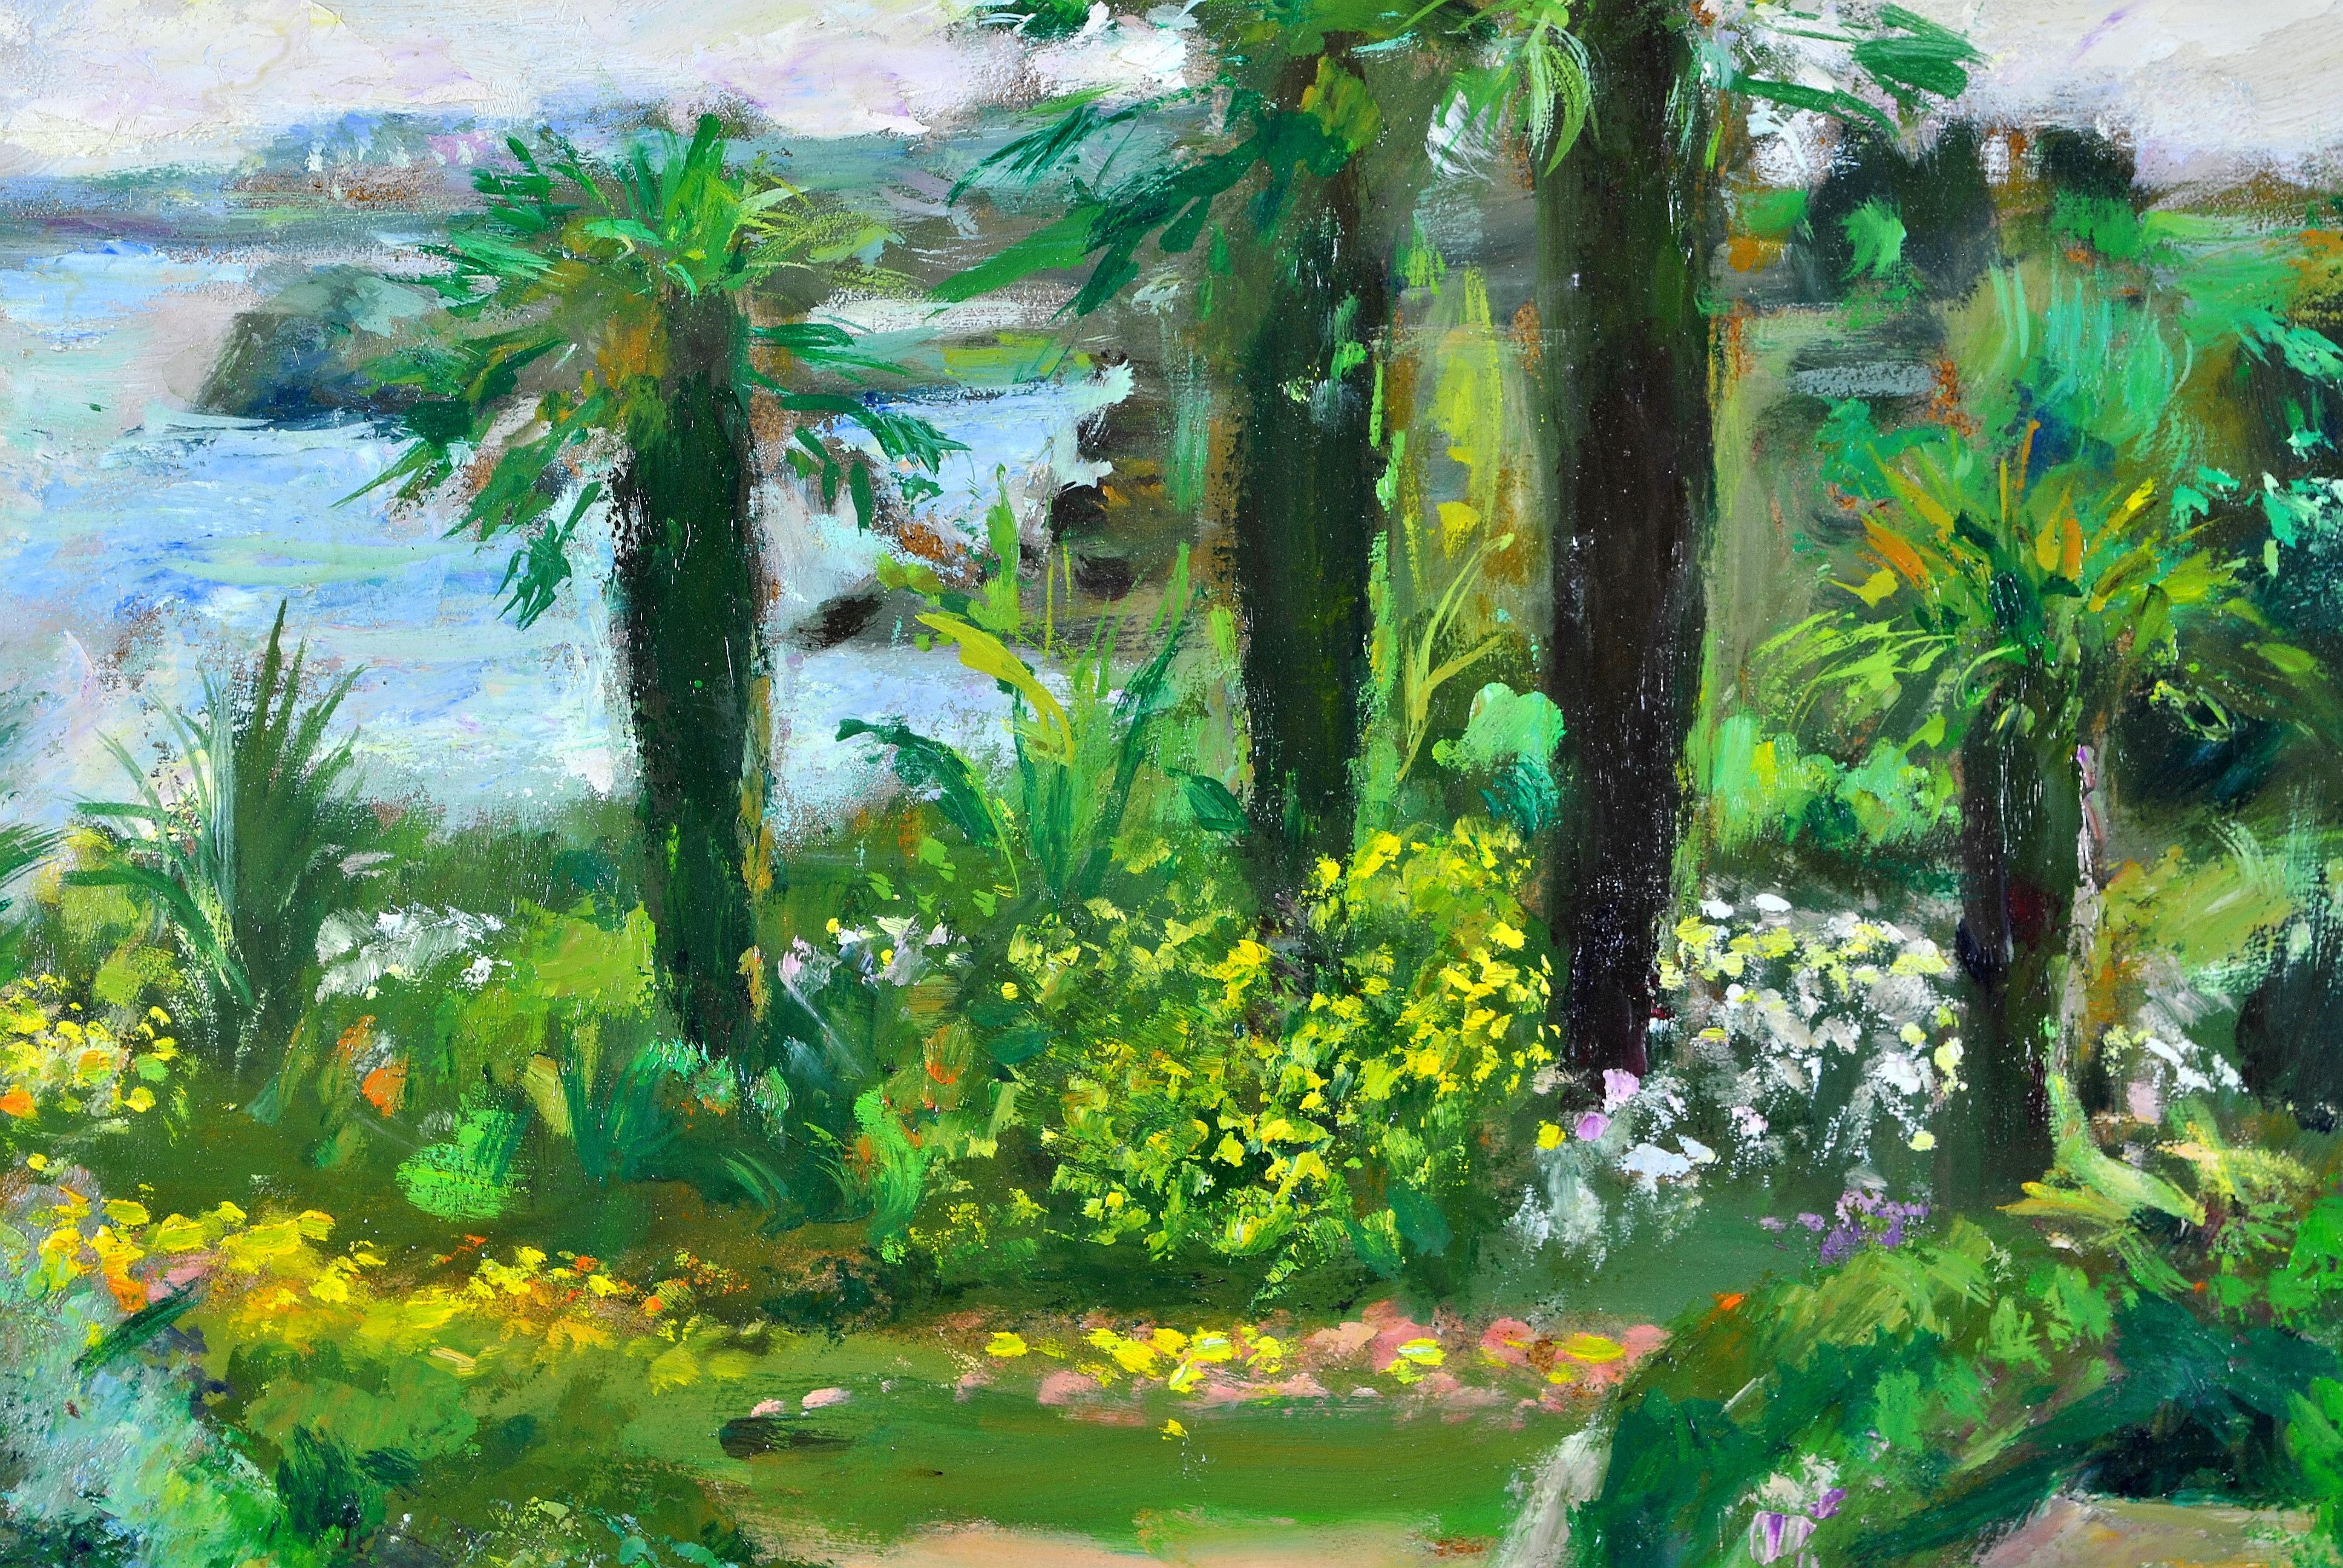 Côte d'Azur Palm Trees - French Riviera South of France Landscape Oil Painting - Gray Landscape Painting by Georges Pacouil